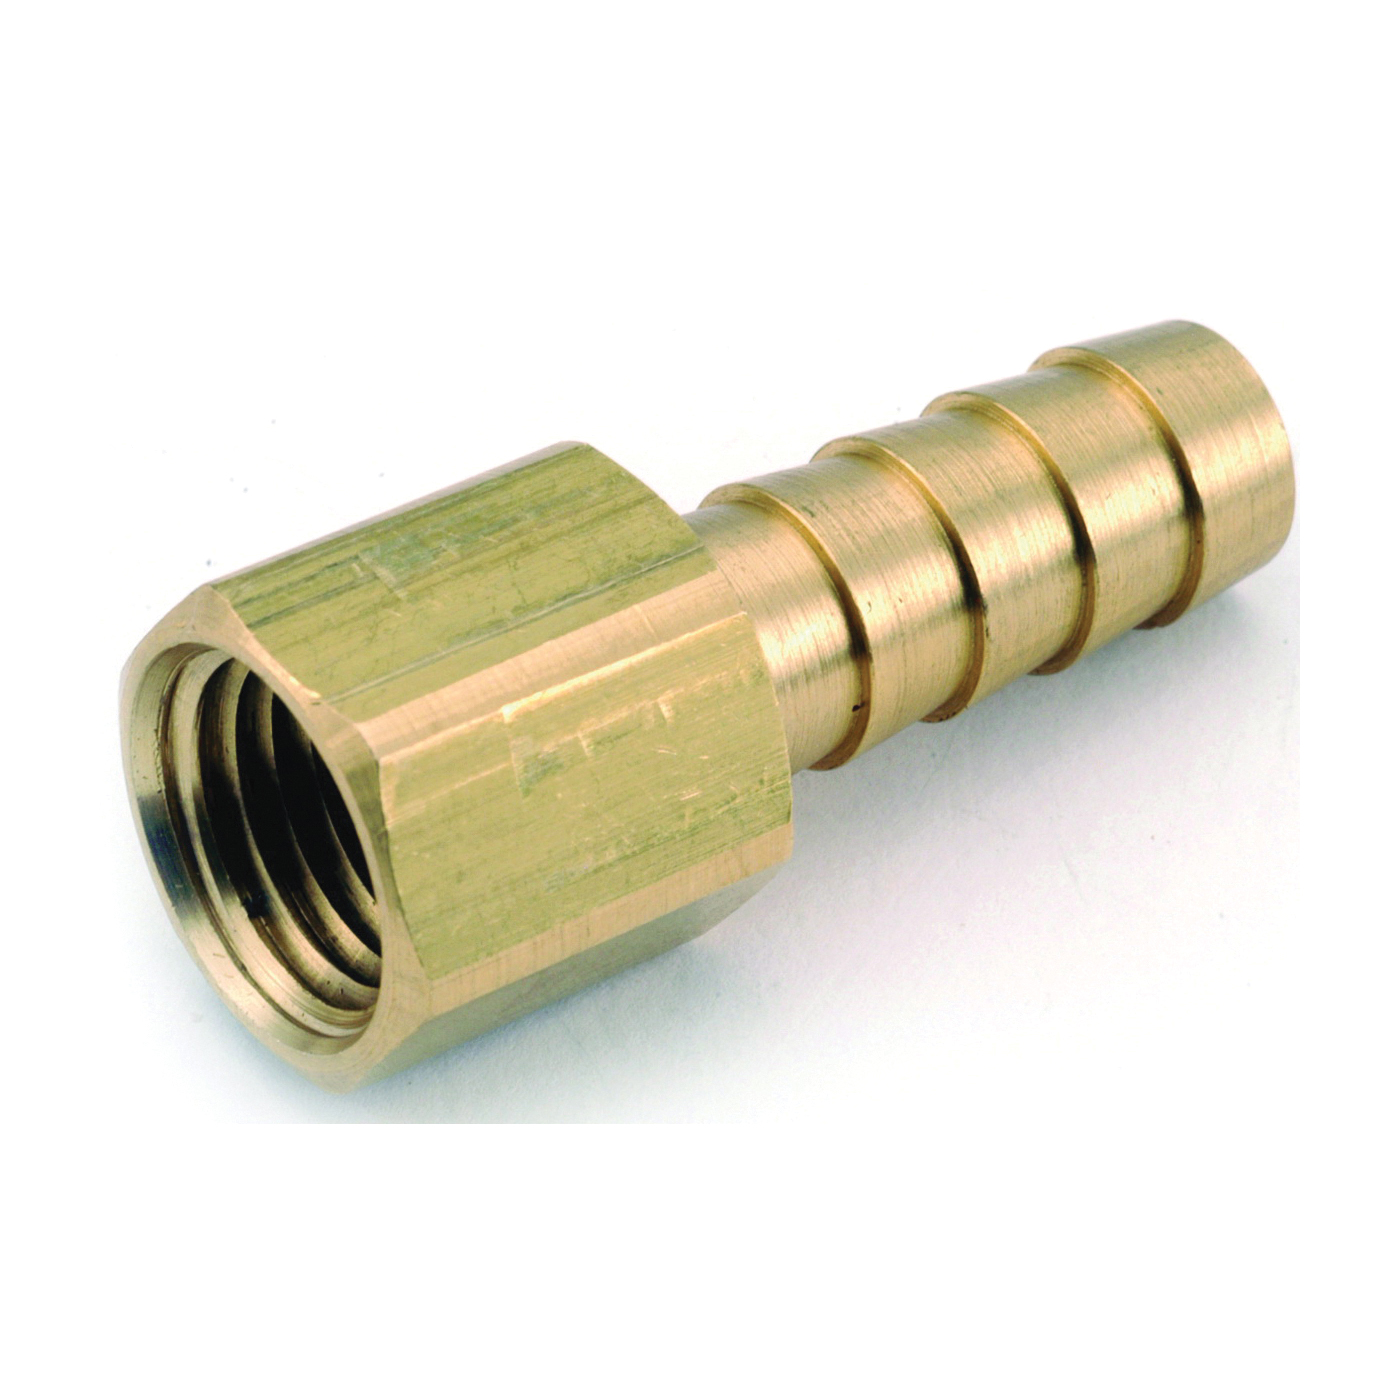 757002-0808 Hose Adapter, 1/2 in, Barb x FPT, Brass